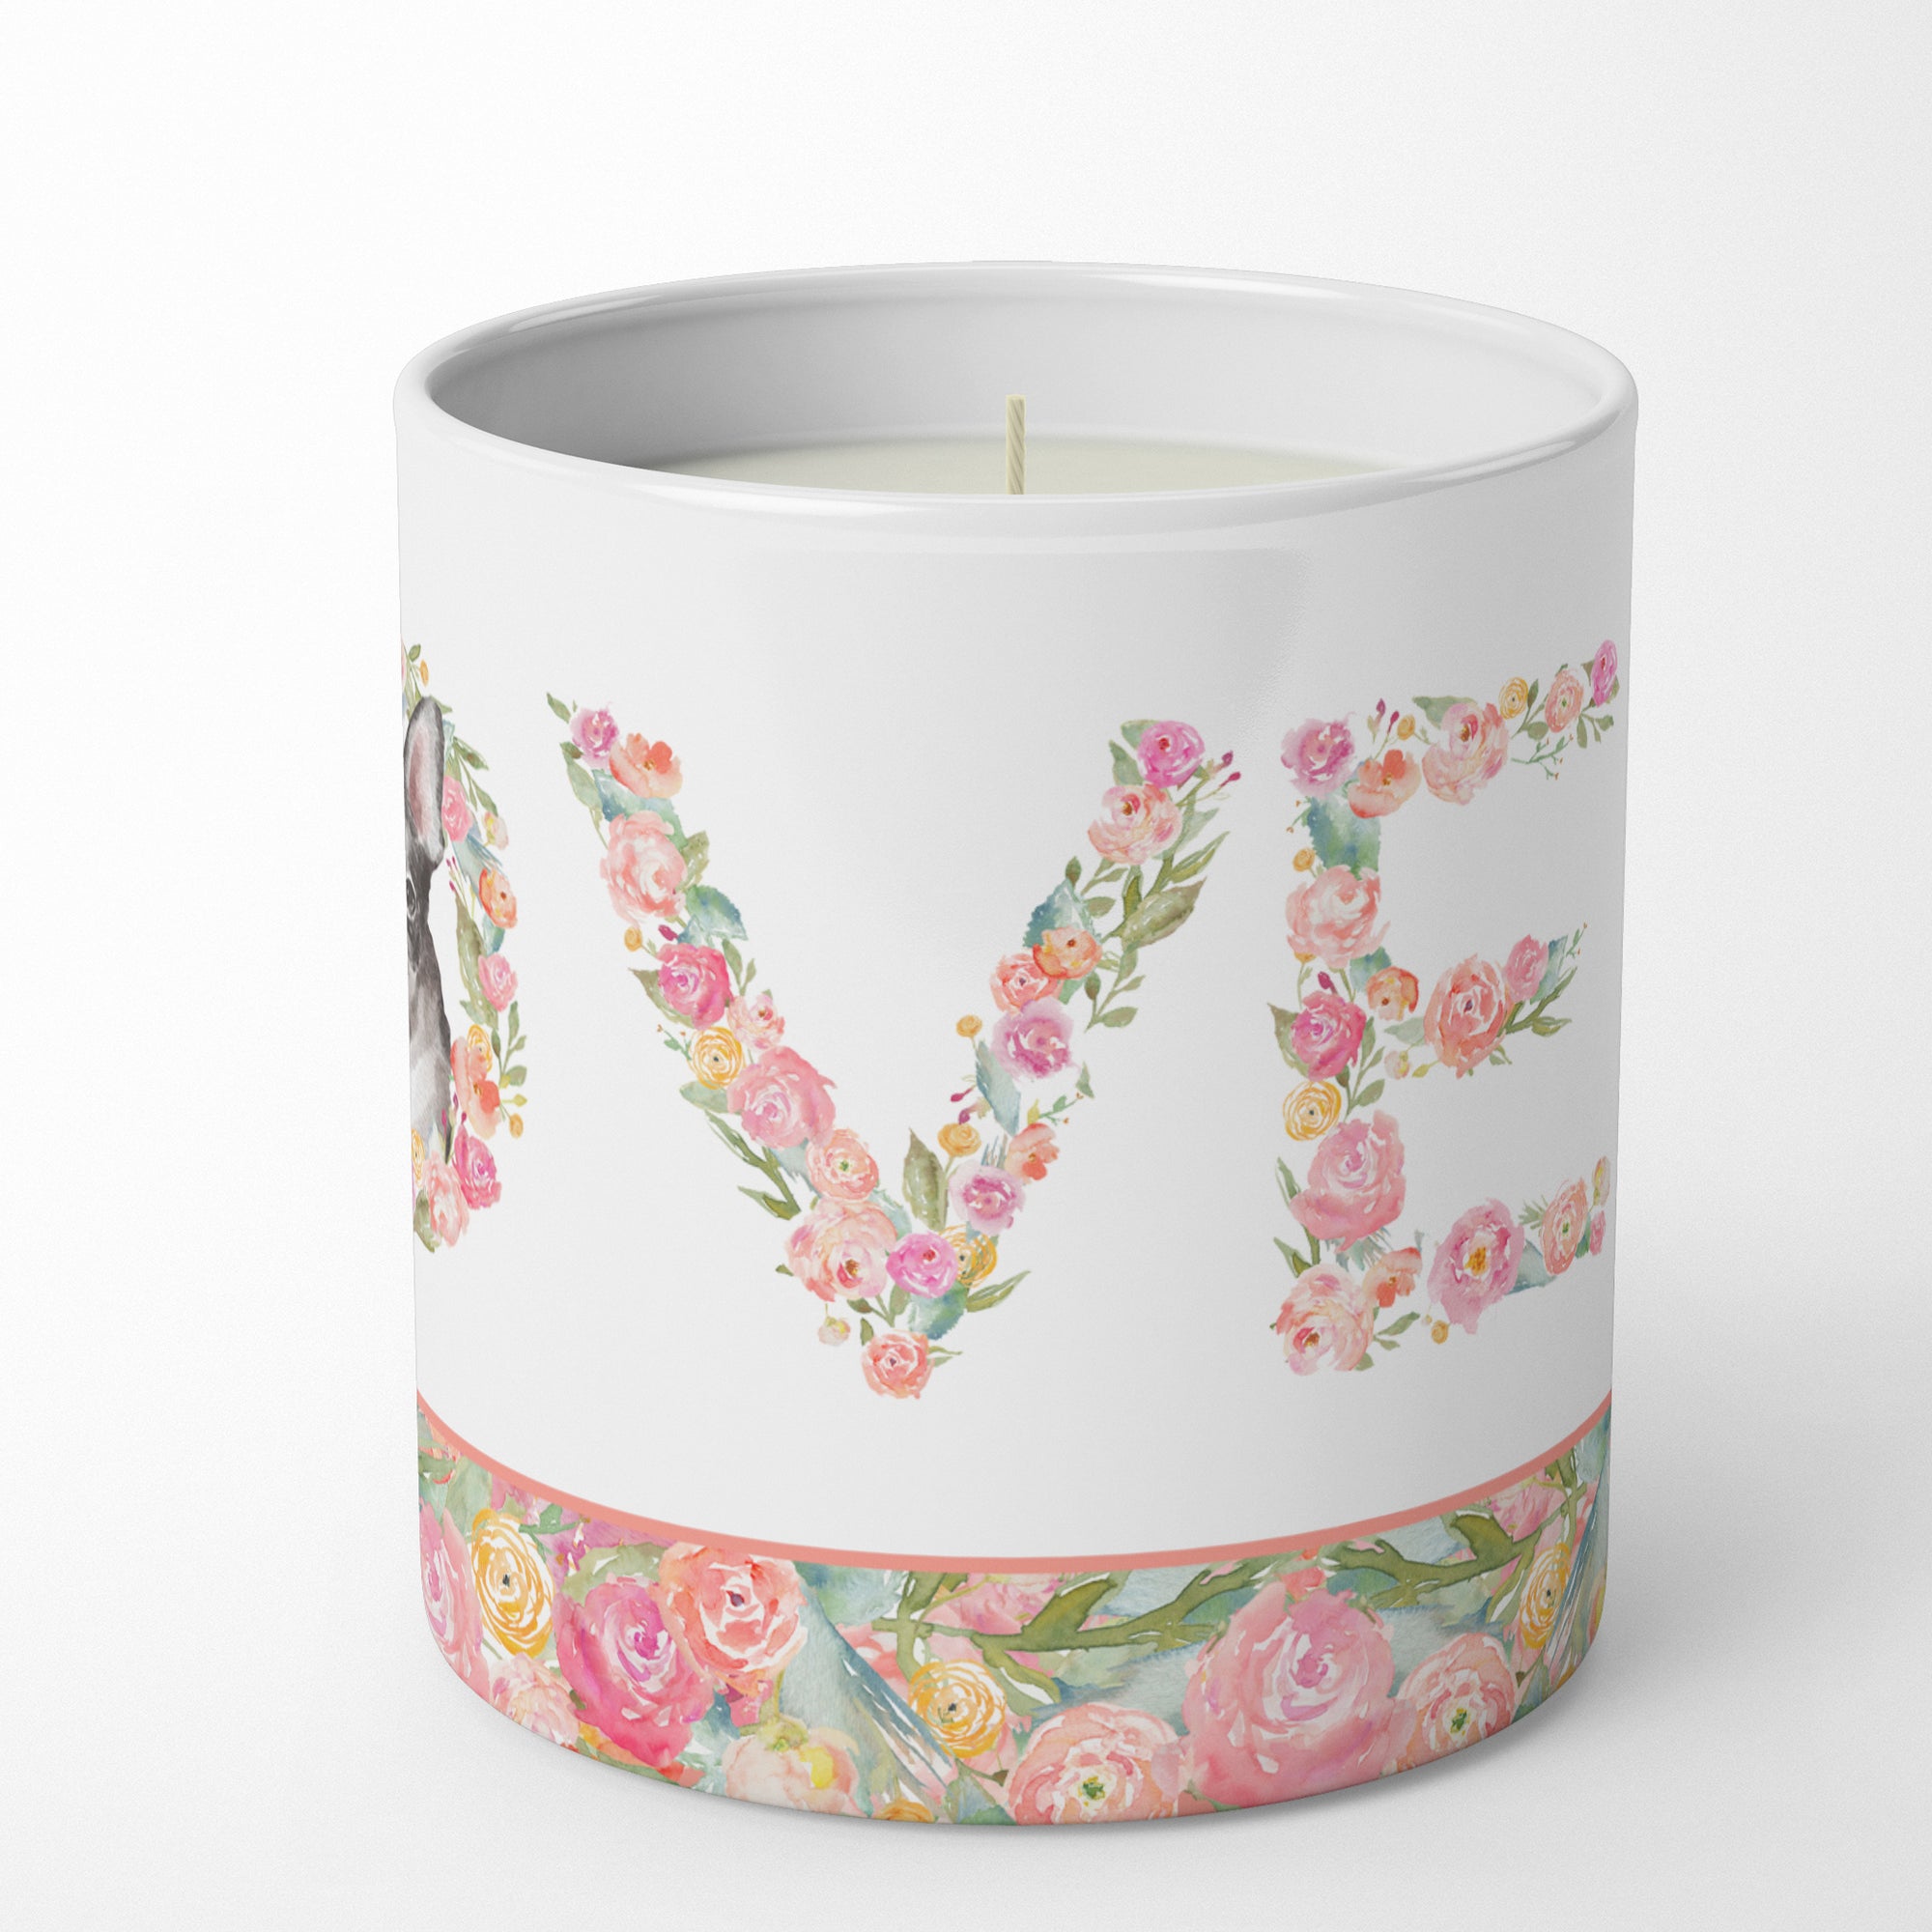 French Bulldog #7 LOVE 10 oz Decorative Soy Candle - the-store.com